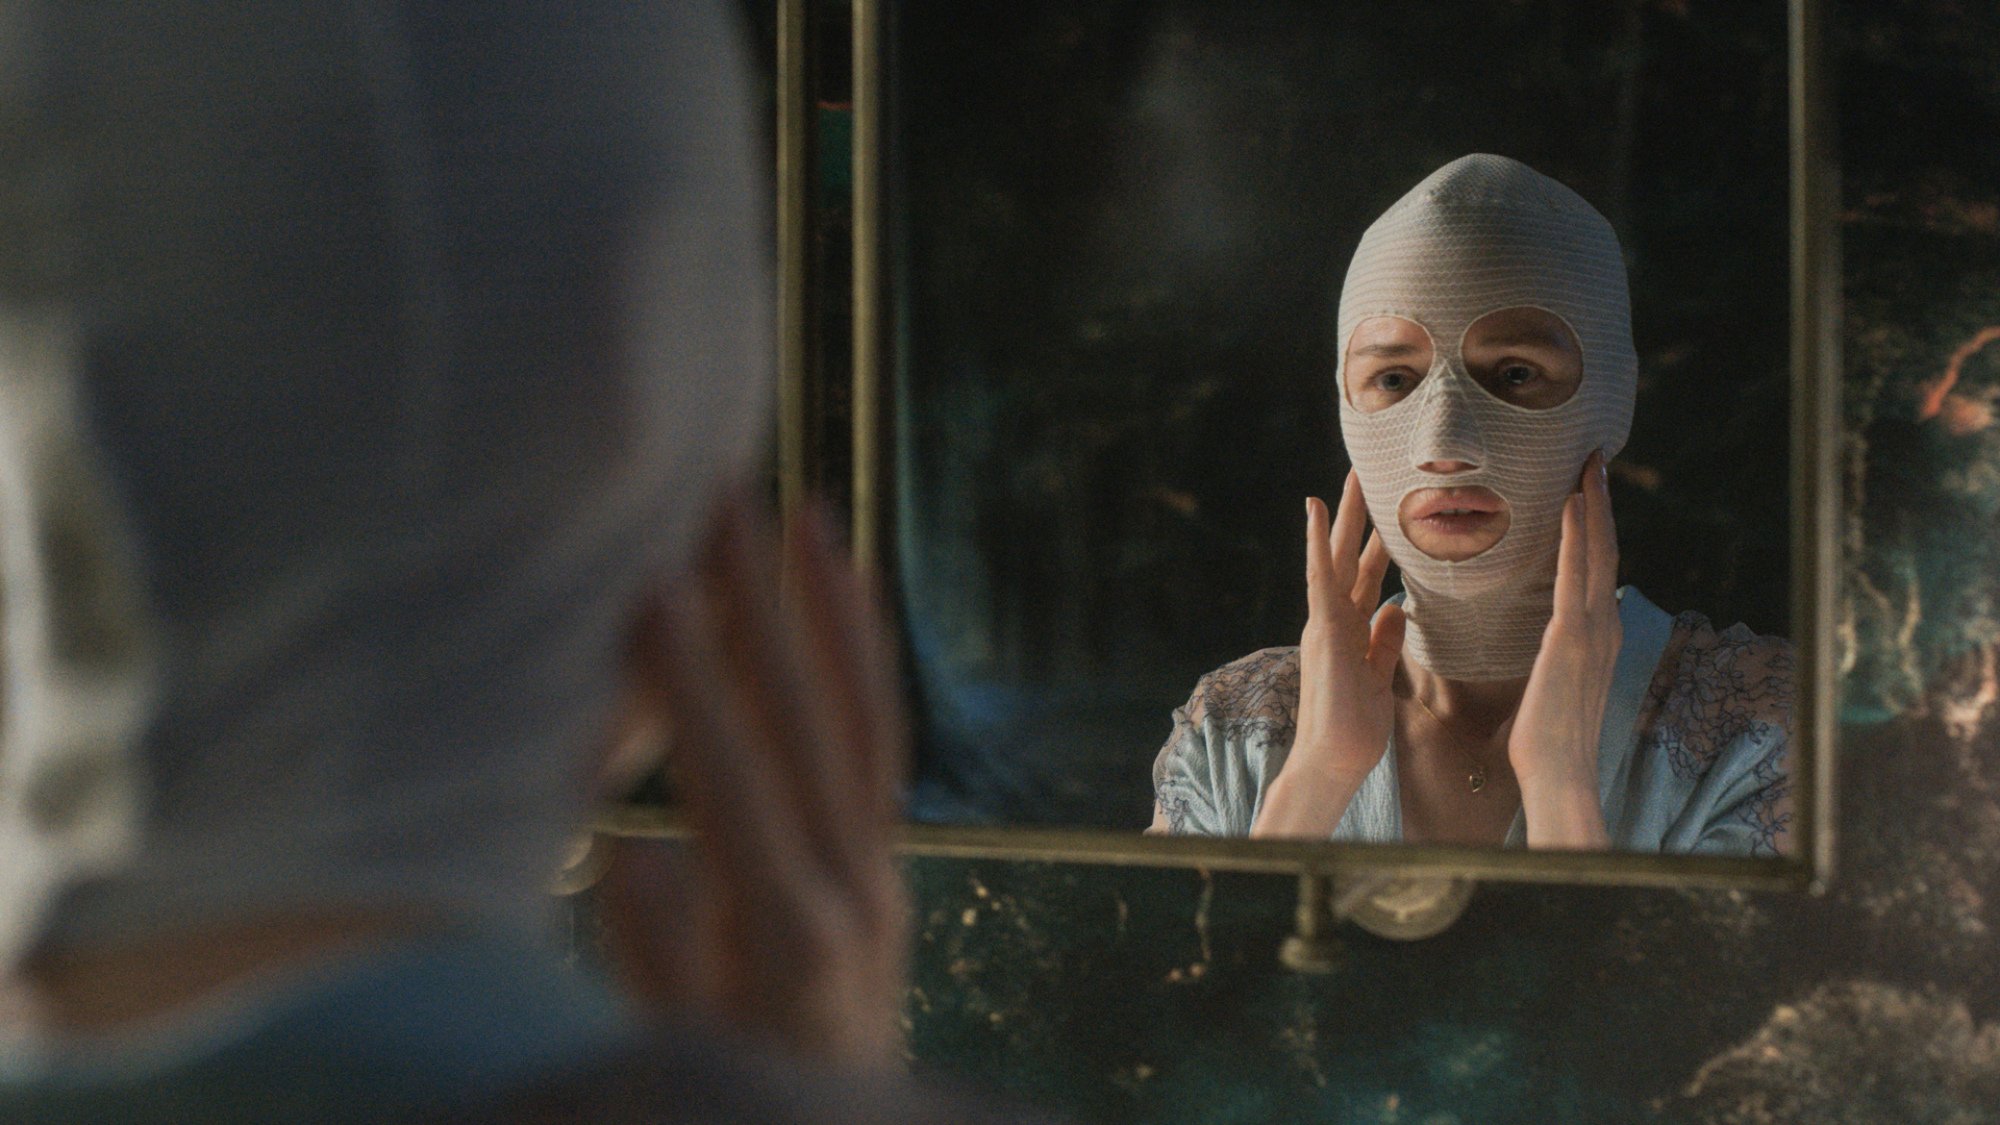 A woman in face bandages looks in a mirror